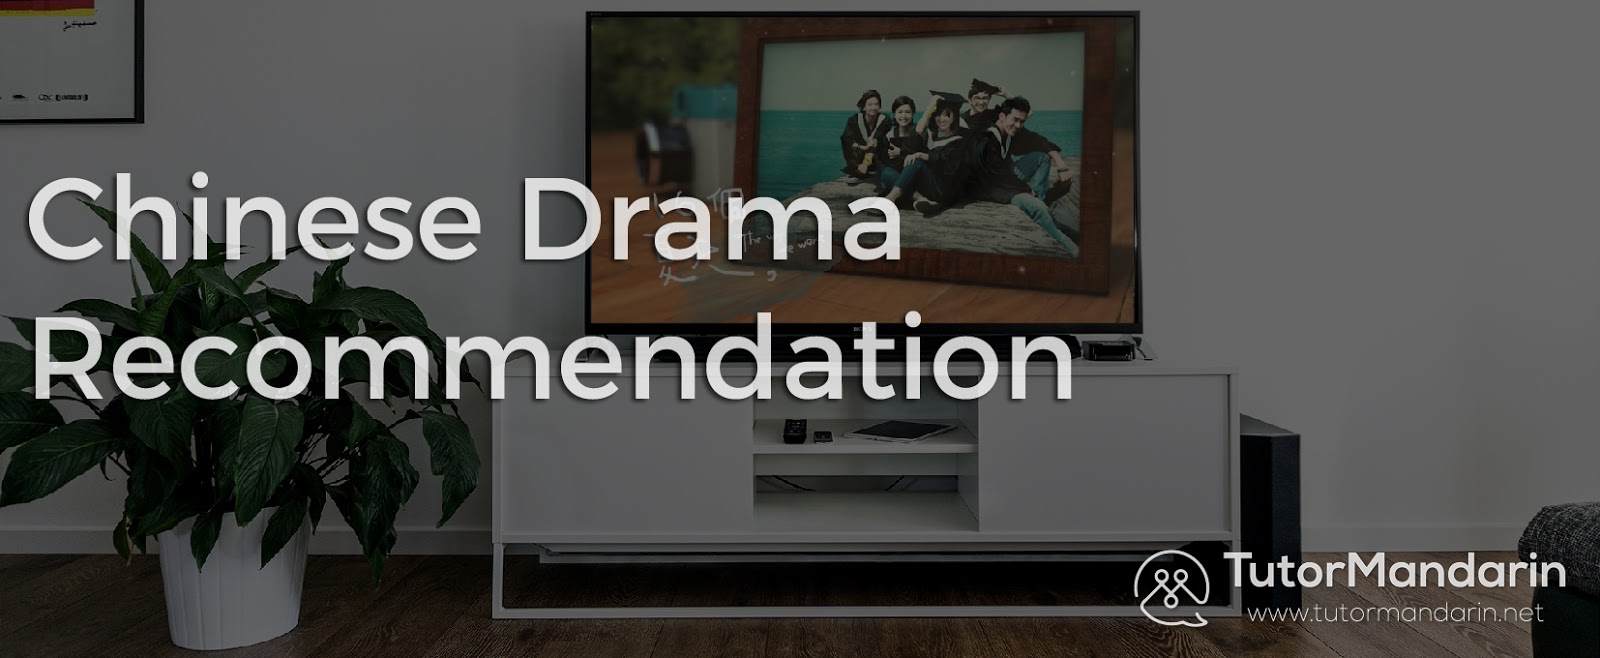 Chinese drama recommendations